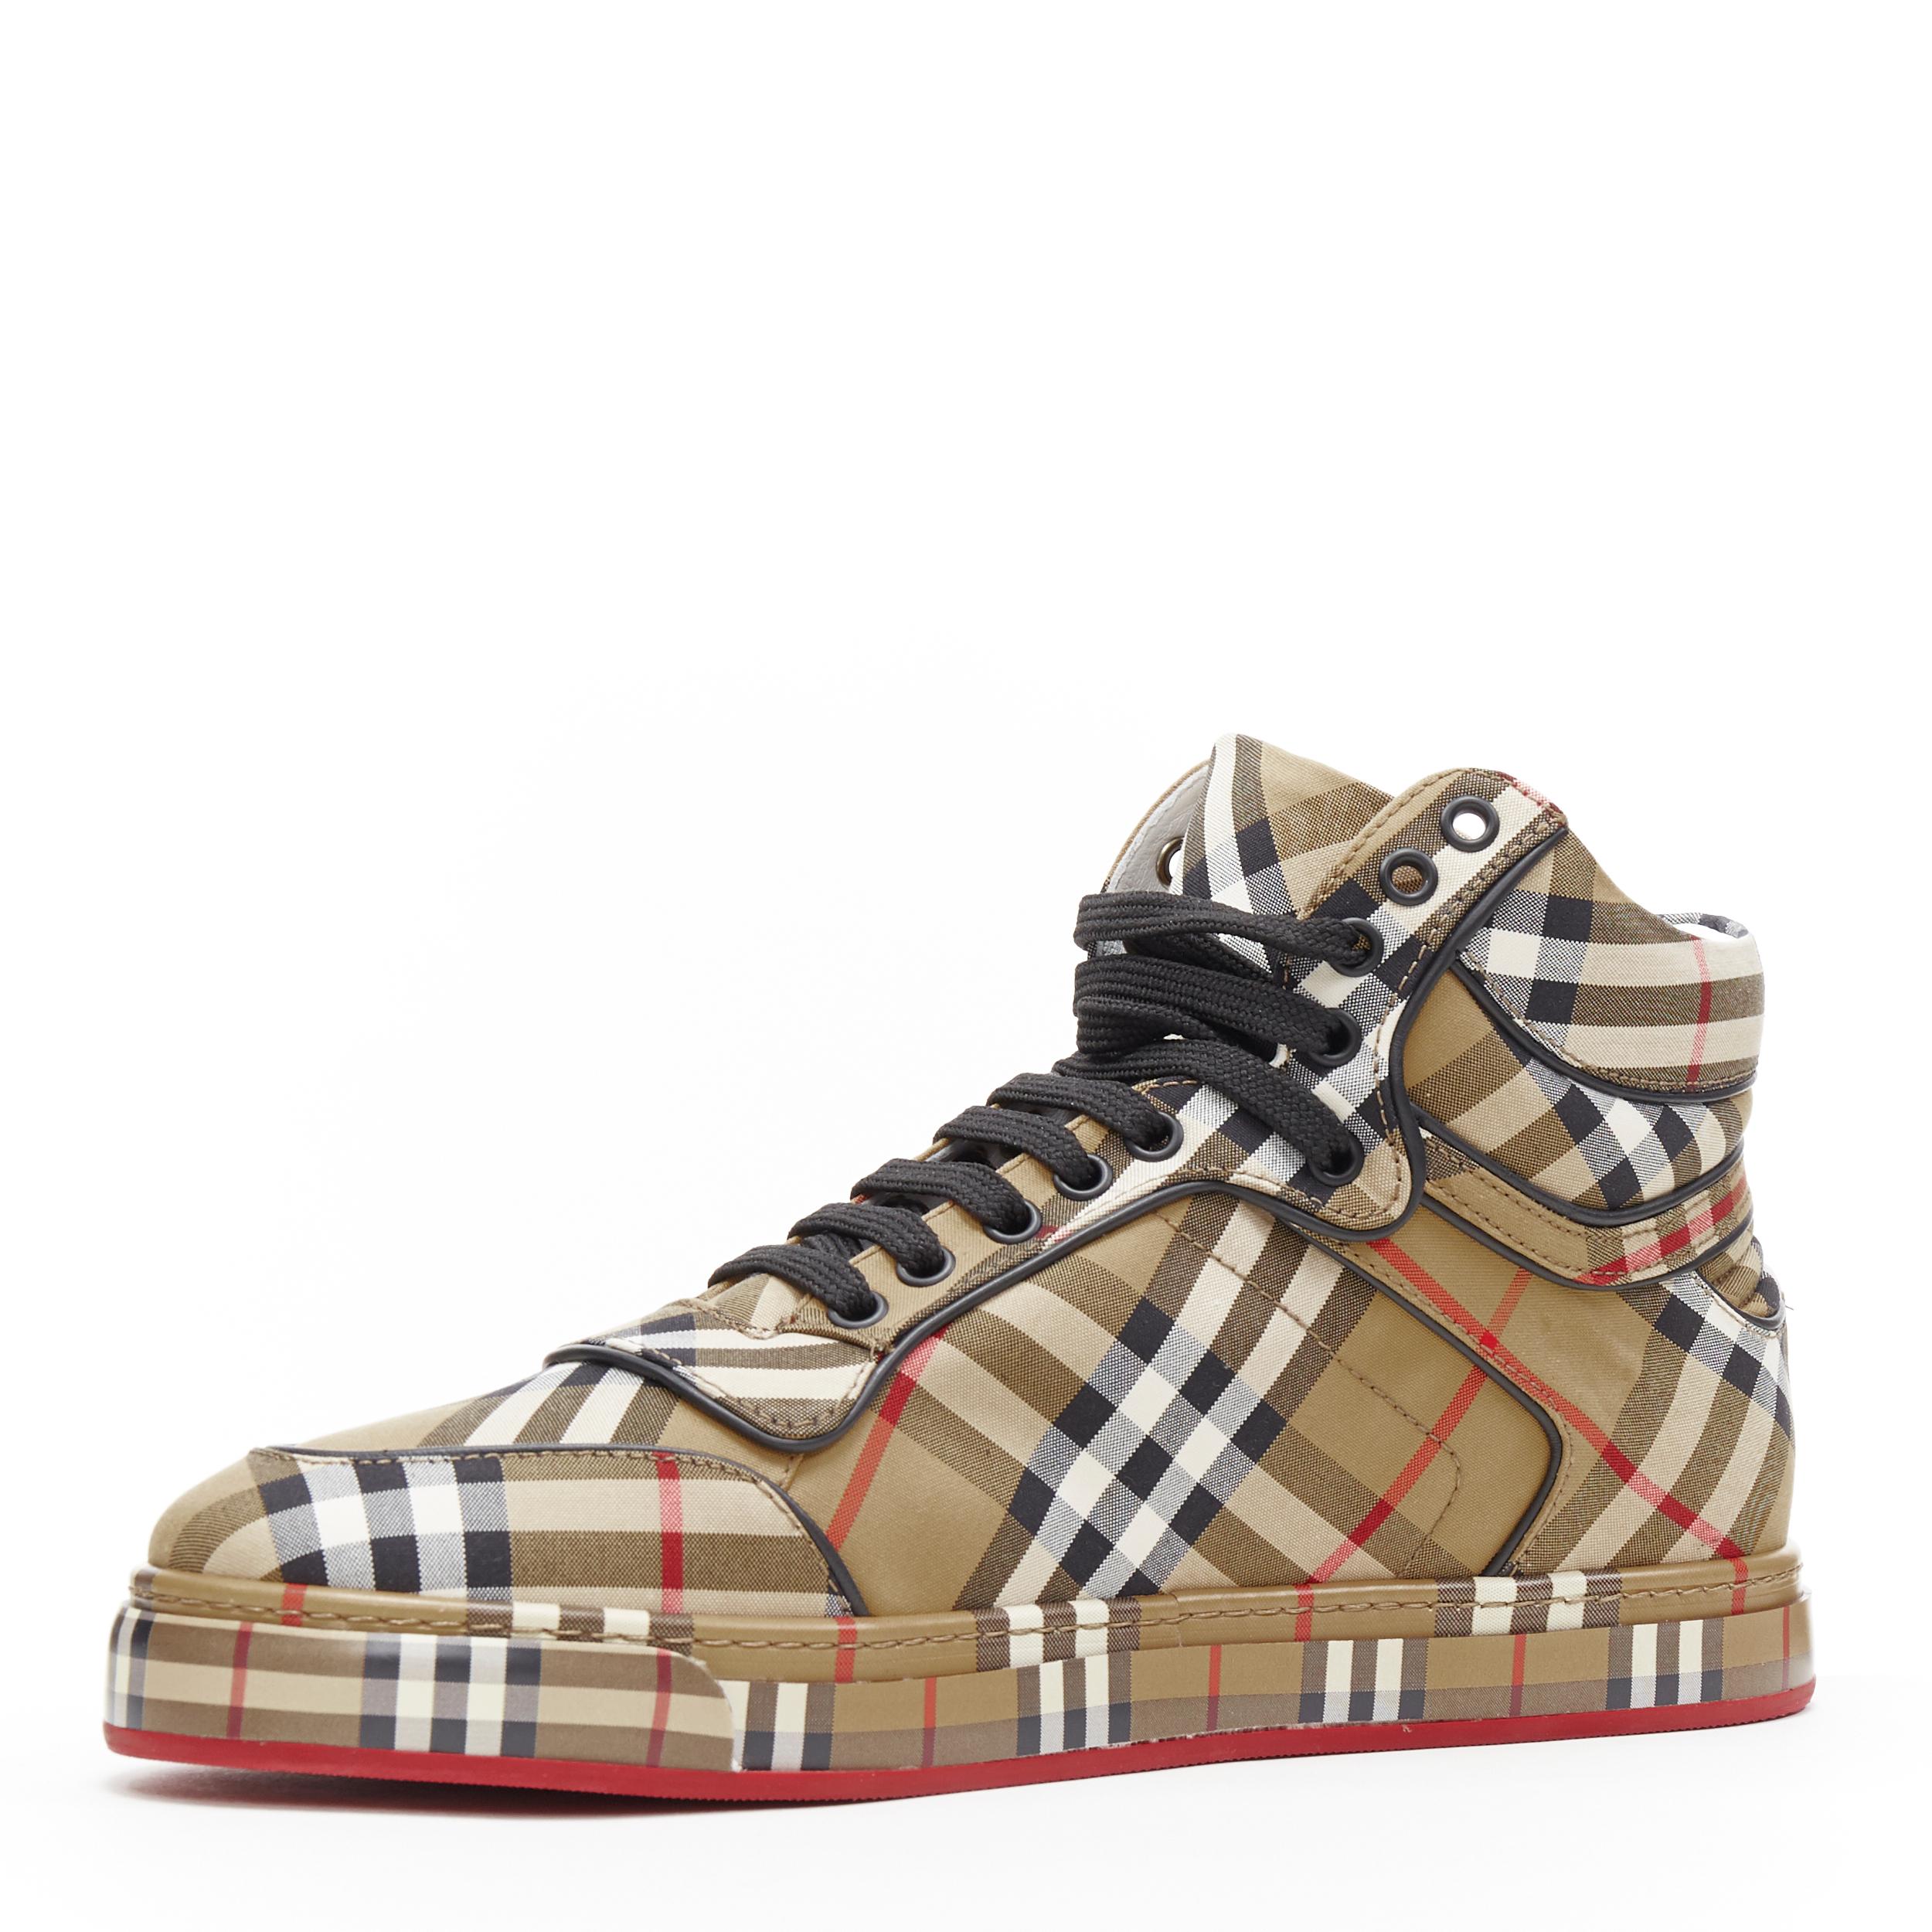 Men's new BURBERRY TISCI Redford Antique Yellow House Check high top sneakers EU45.5